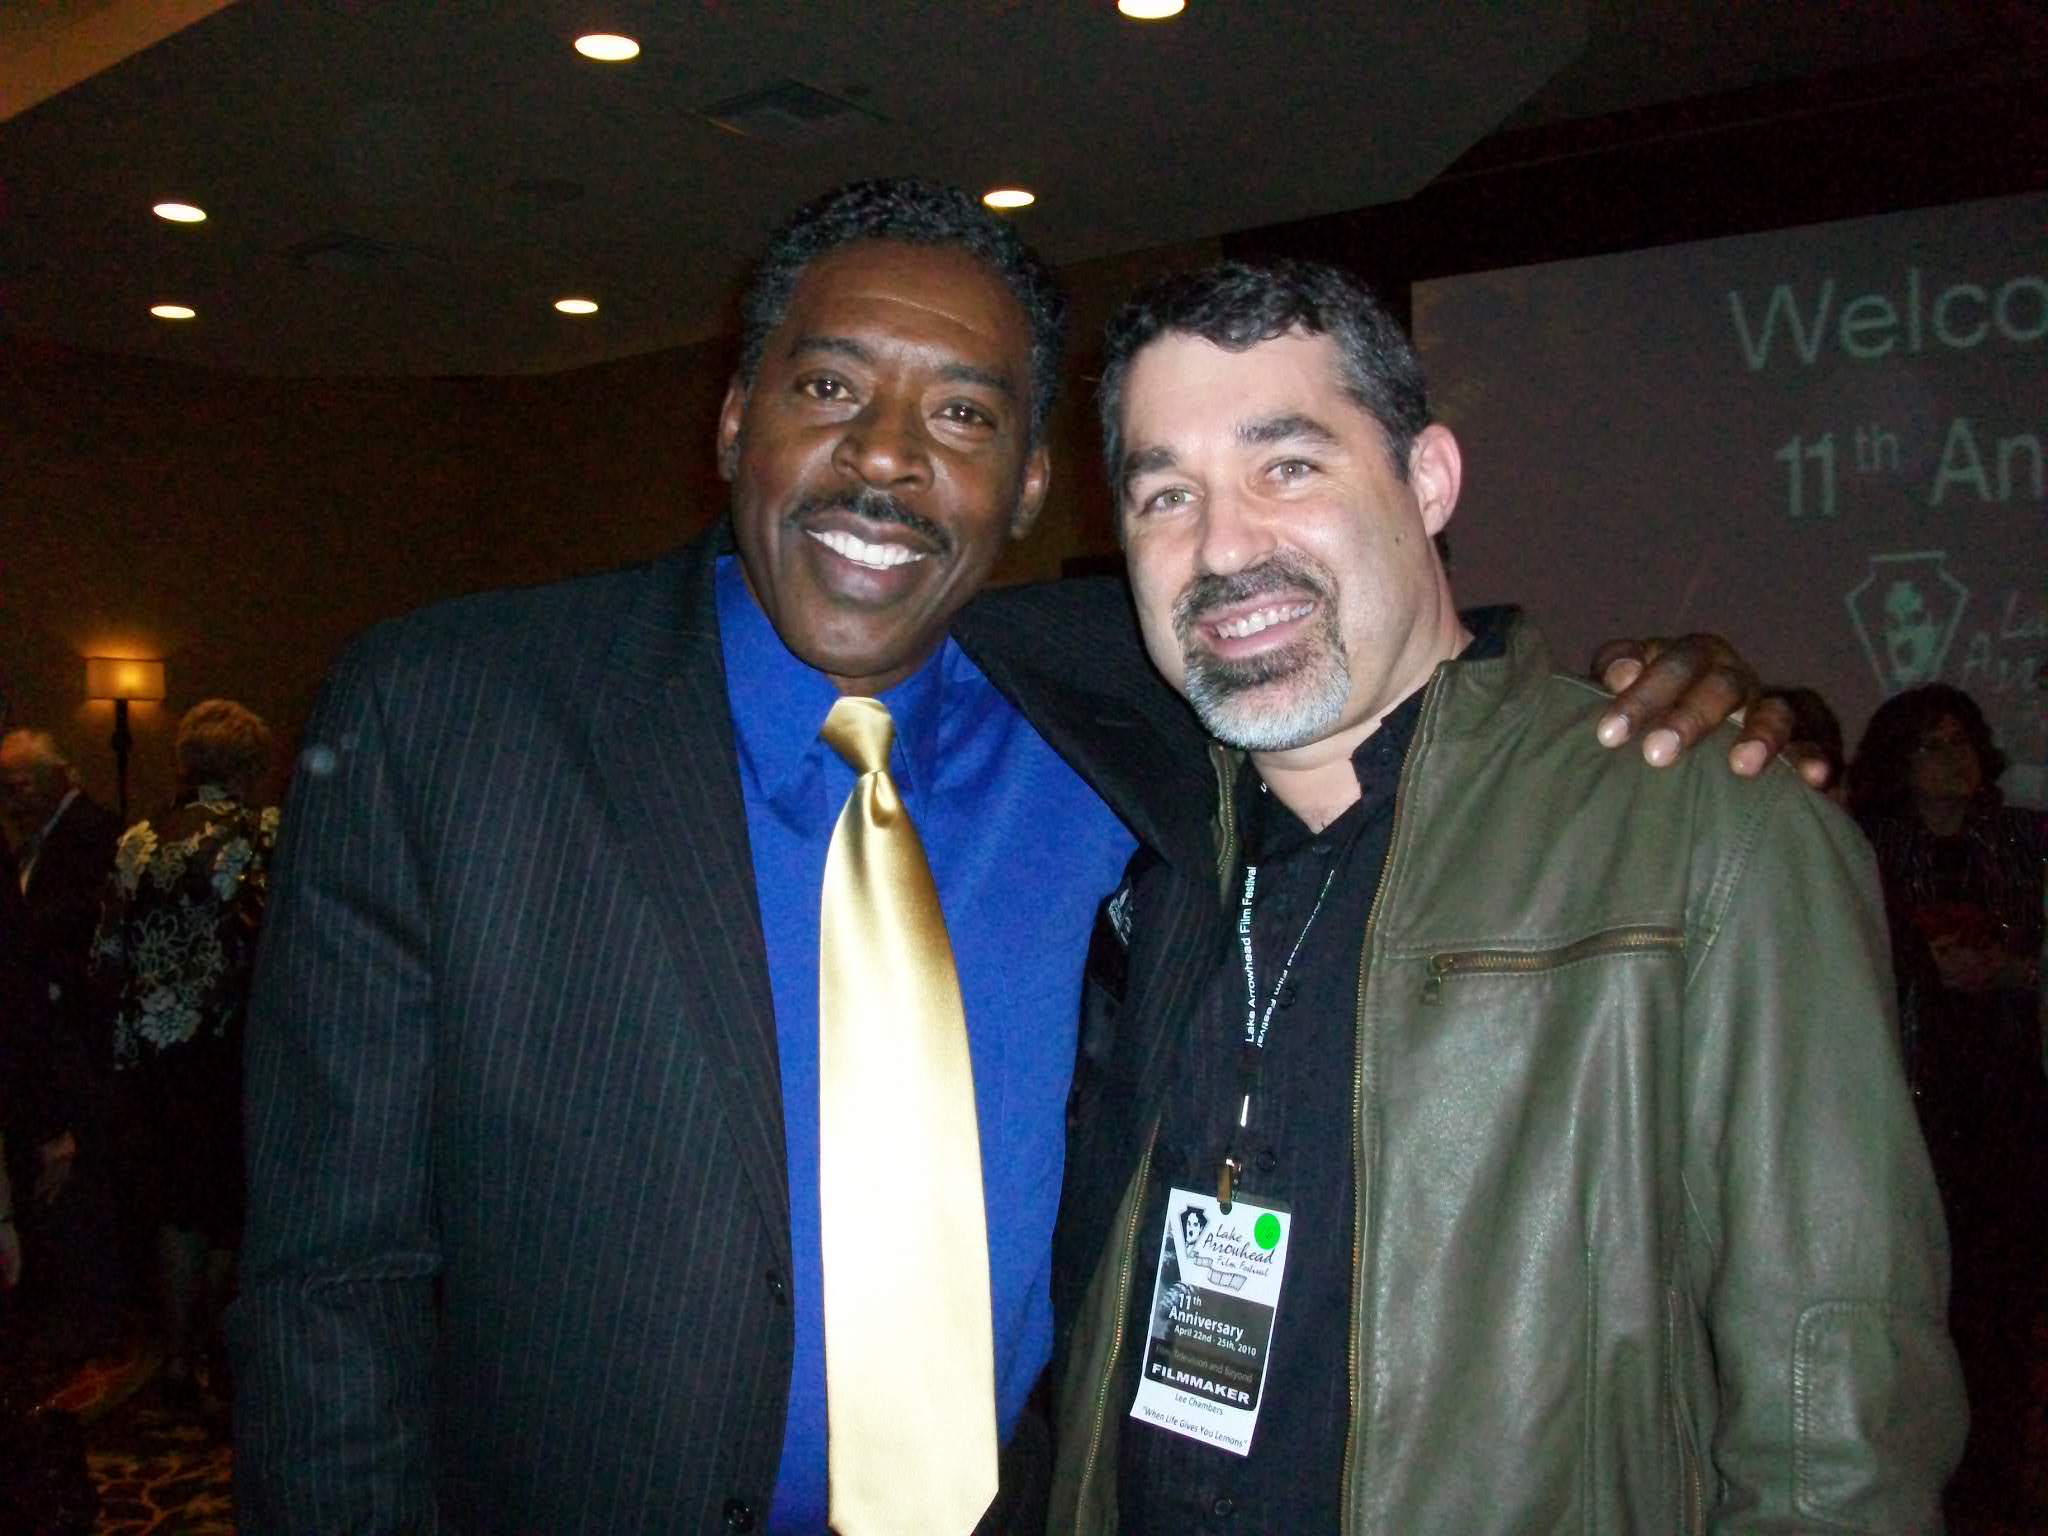 Director Lee Chambers with Actor Ernie Hudson at the 2010 Lake Arrowhead Film Festival in California